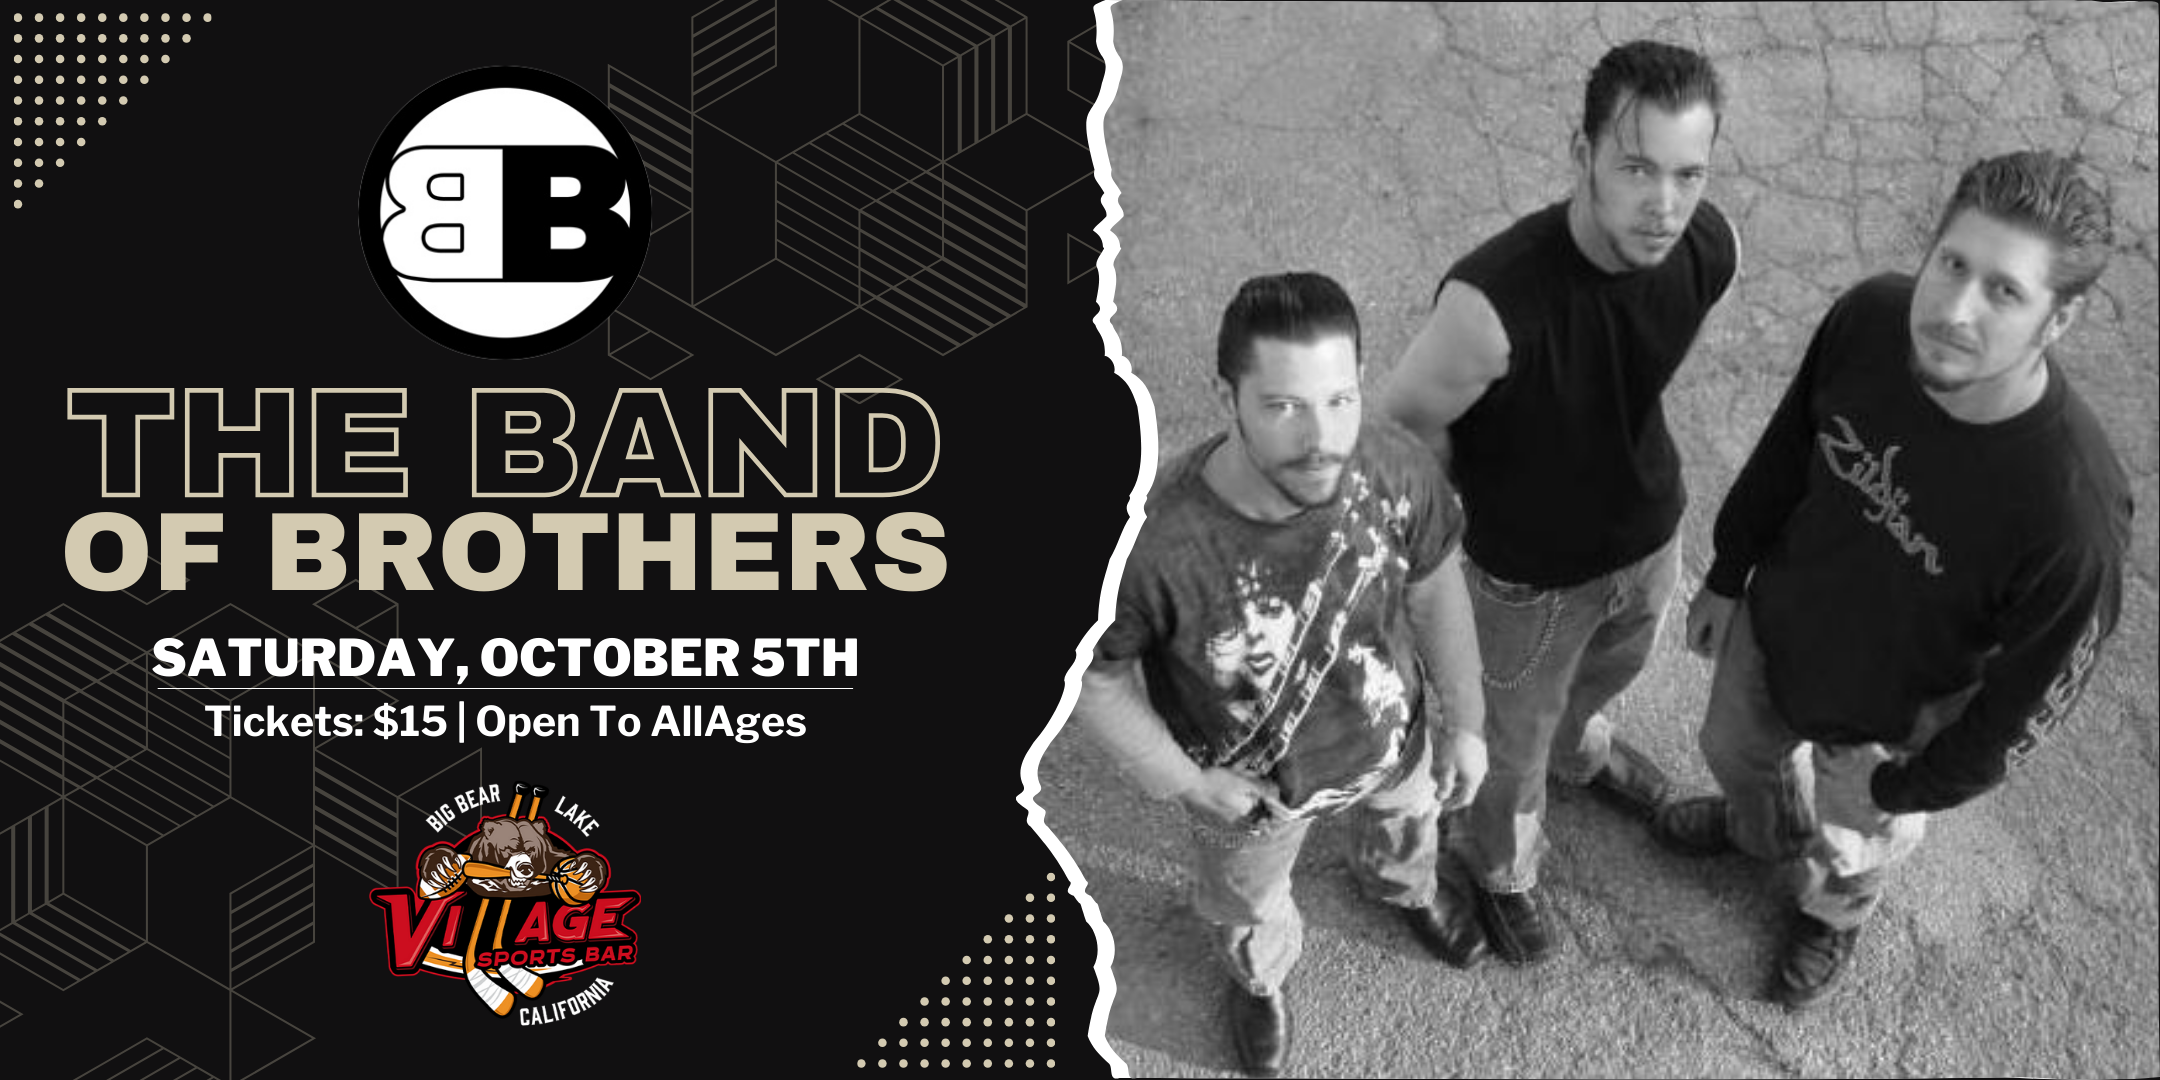 Promotional poster for the Band Of Brothers 10-Year Reunion Show at the Village Sports Bar, Big Bear Lake, on Saturday, October 5th. Tickets are $15 and the event is open to all ages. The poster features the band members in a black-and-white photograph, standing on a textured ground, with event details displayed alongside. The Village Sports Bar logo is also visible.